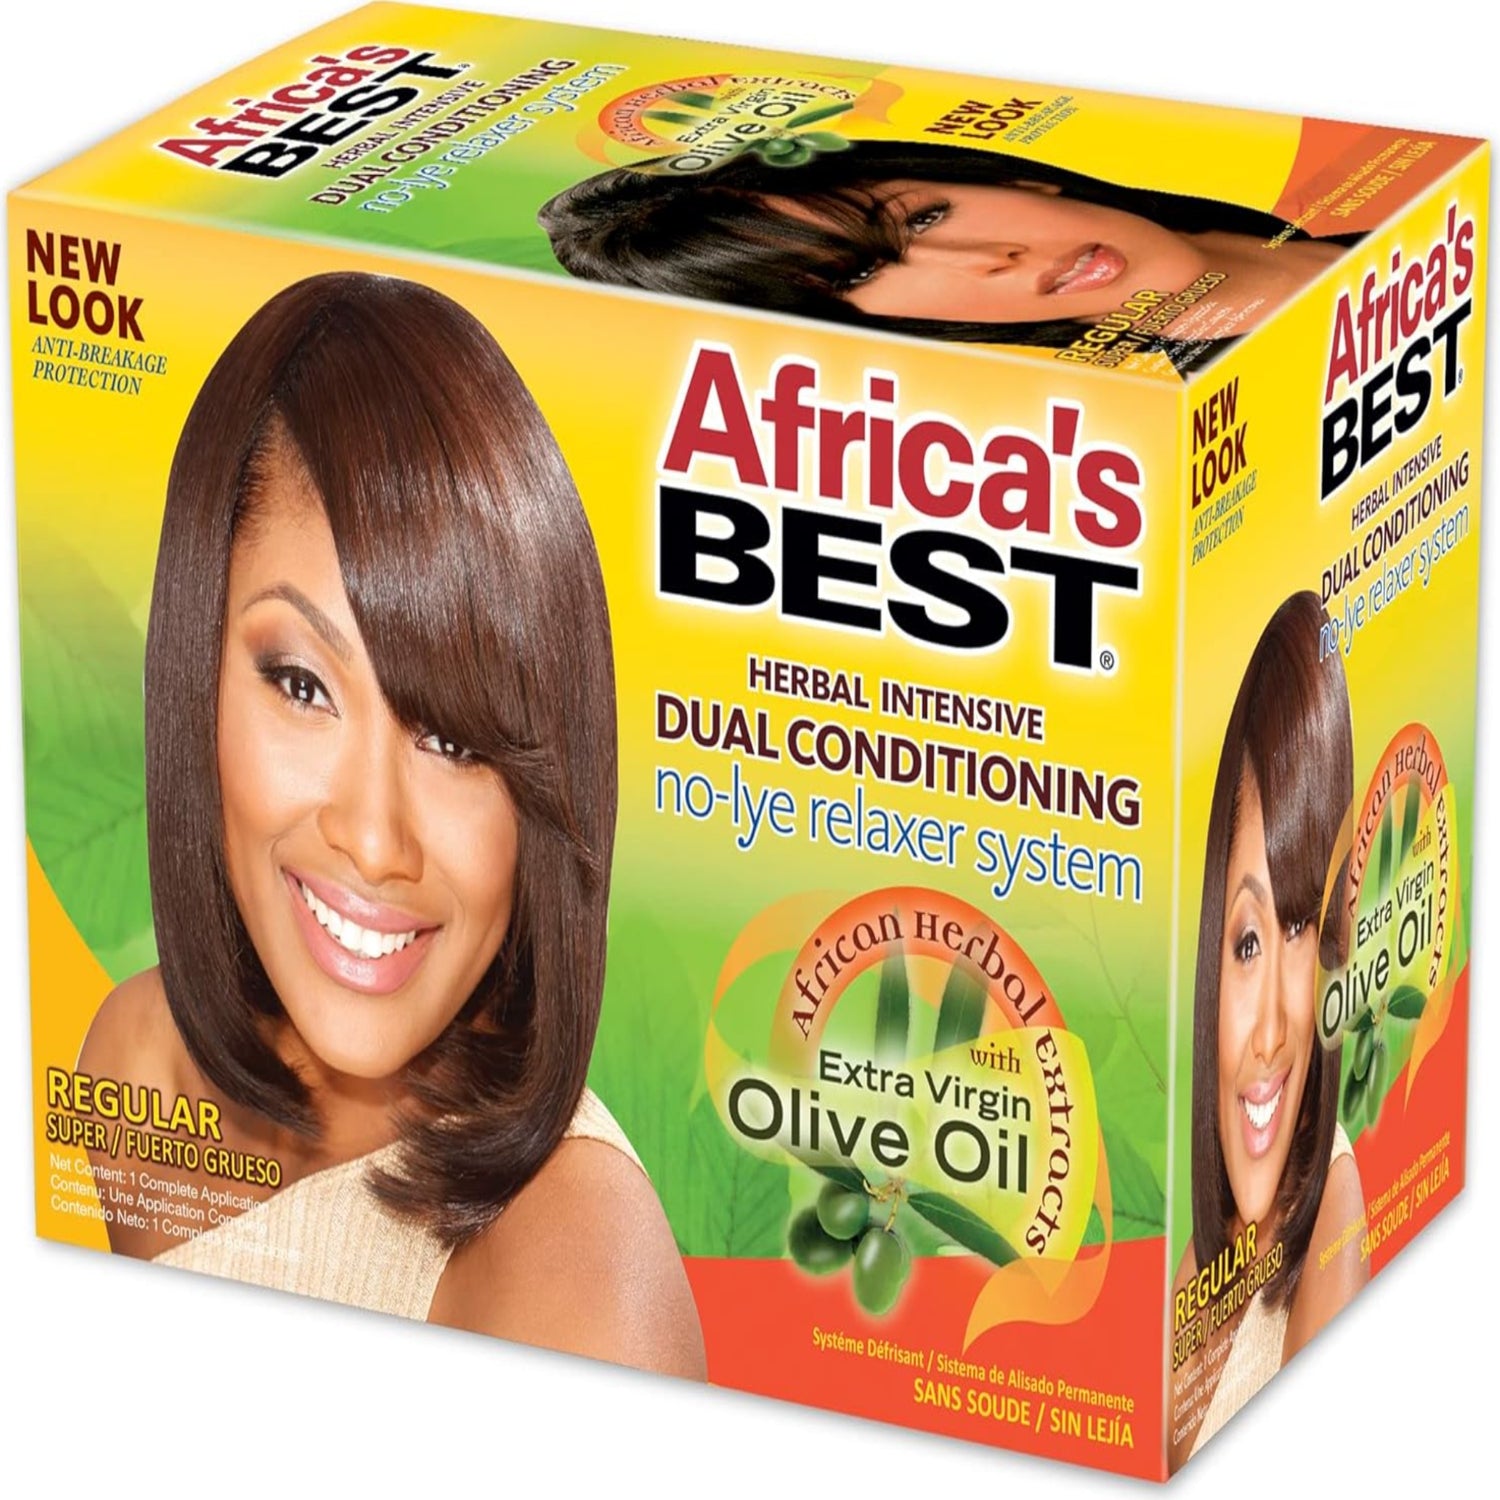 Africa's Best Dual Conditioning No-Lye Relaxer System Regular, 14.39 Oz (CH111701)